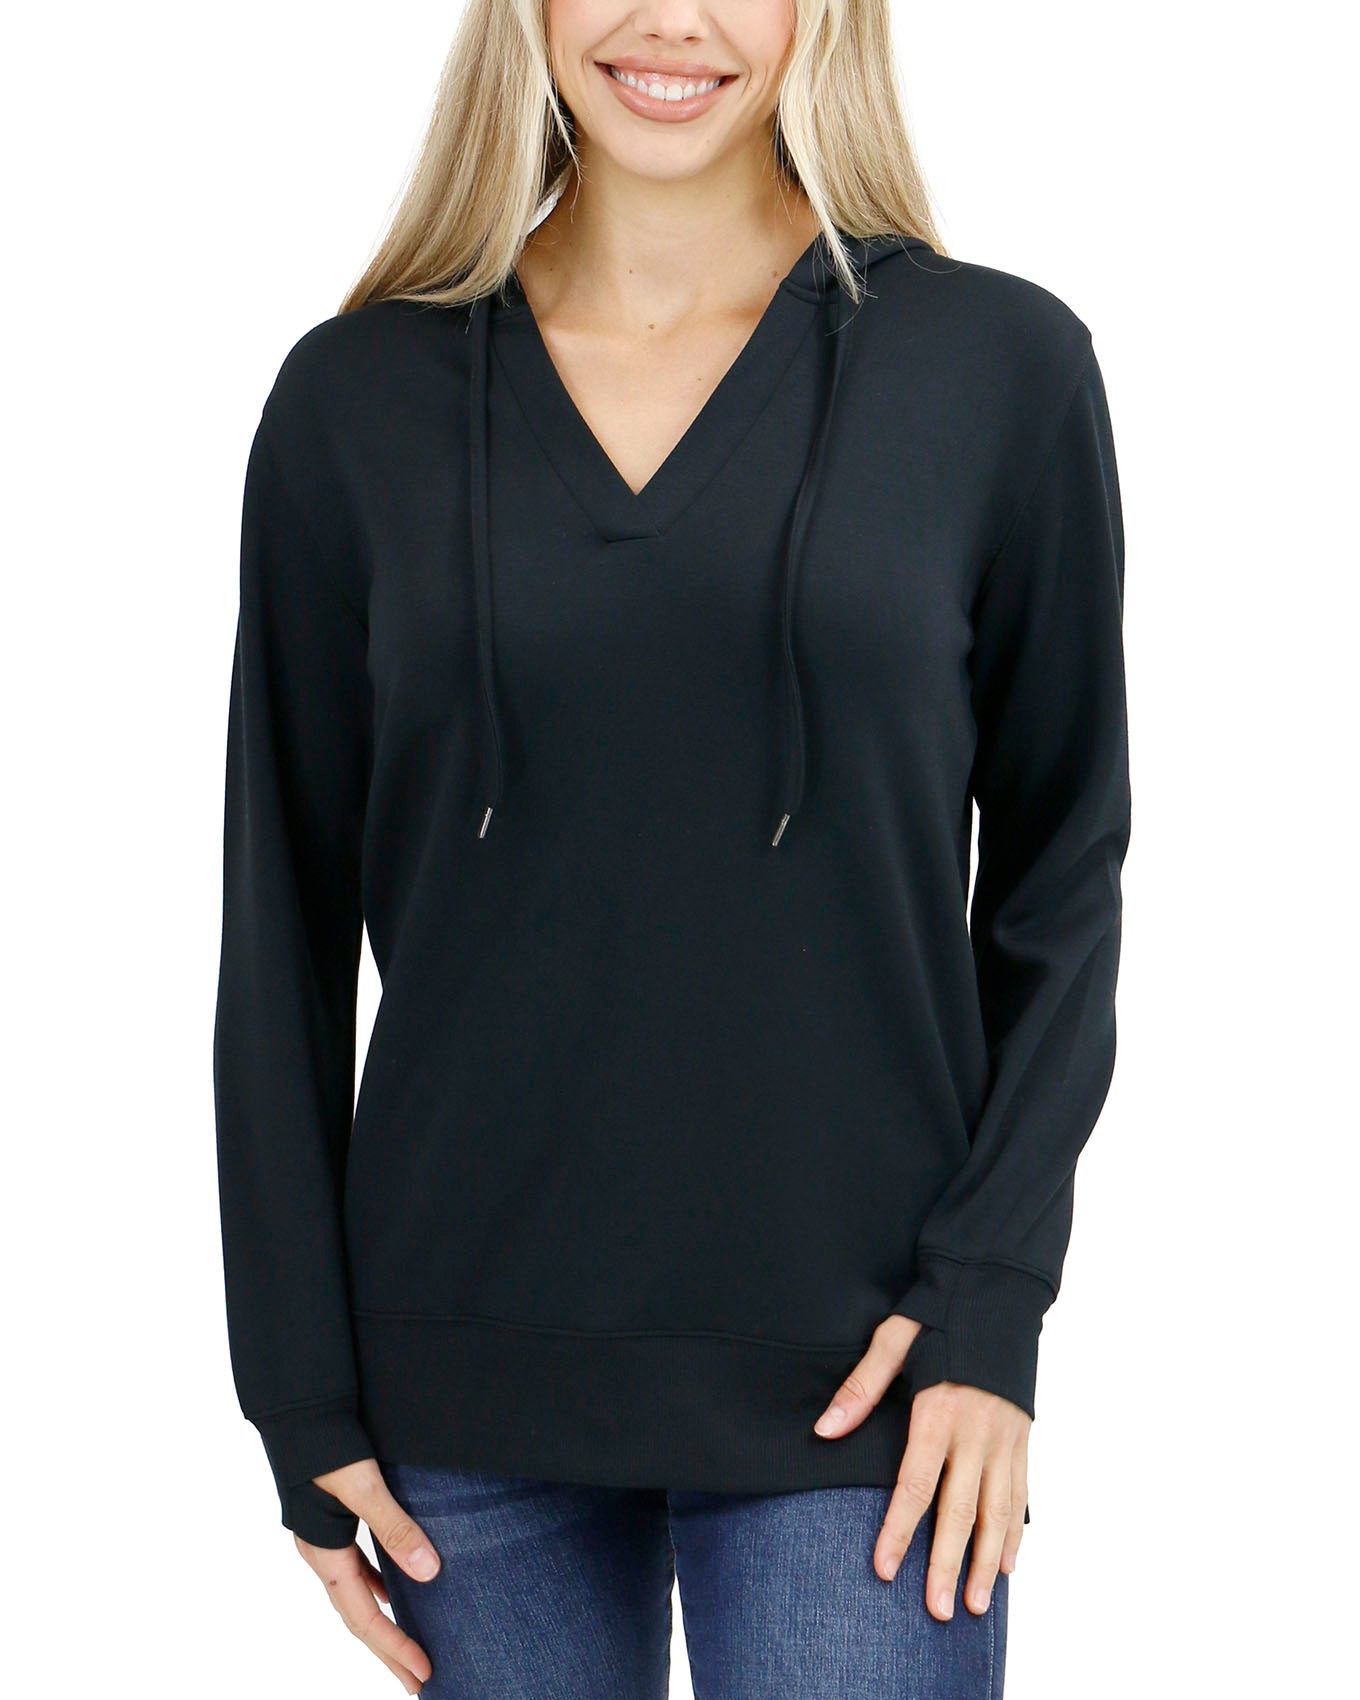 Luxe Knit Black Hooded Pullover - FINAL SALE - Grace and Lace